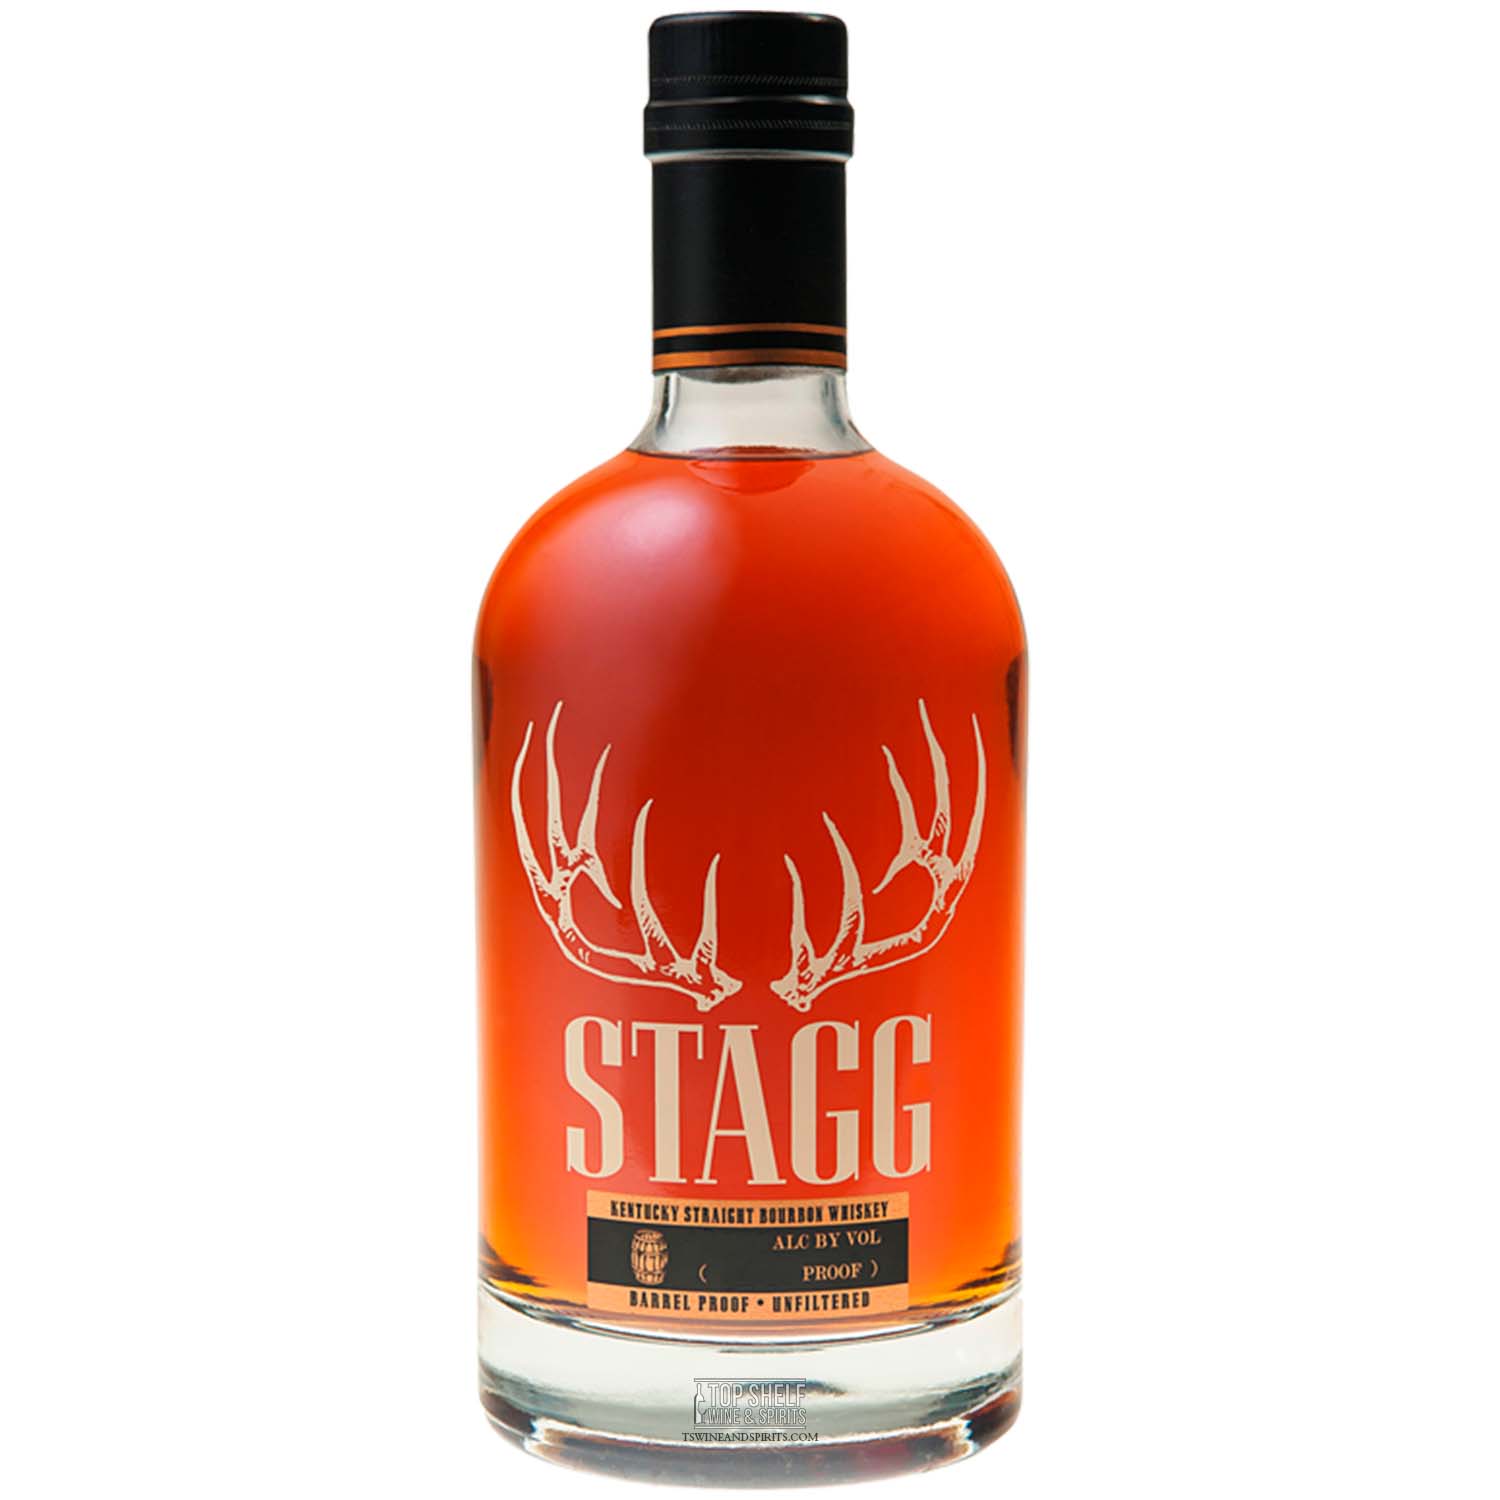 Stagg Unfiltered Kentucky Straight Bourbon 130 Proof